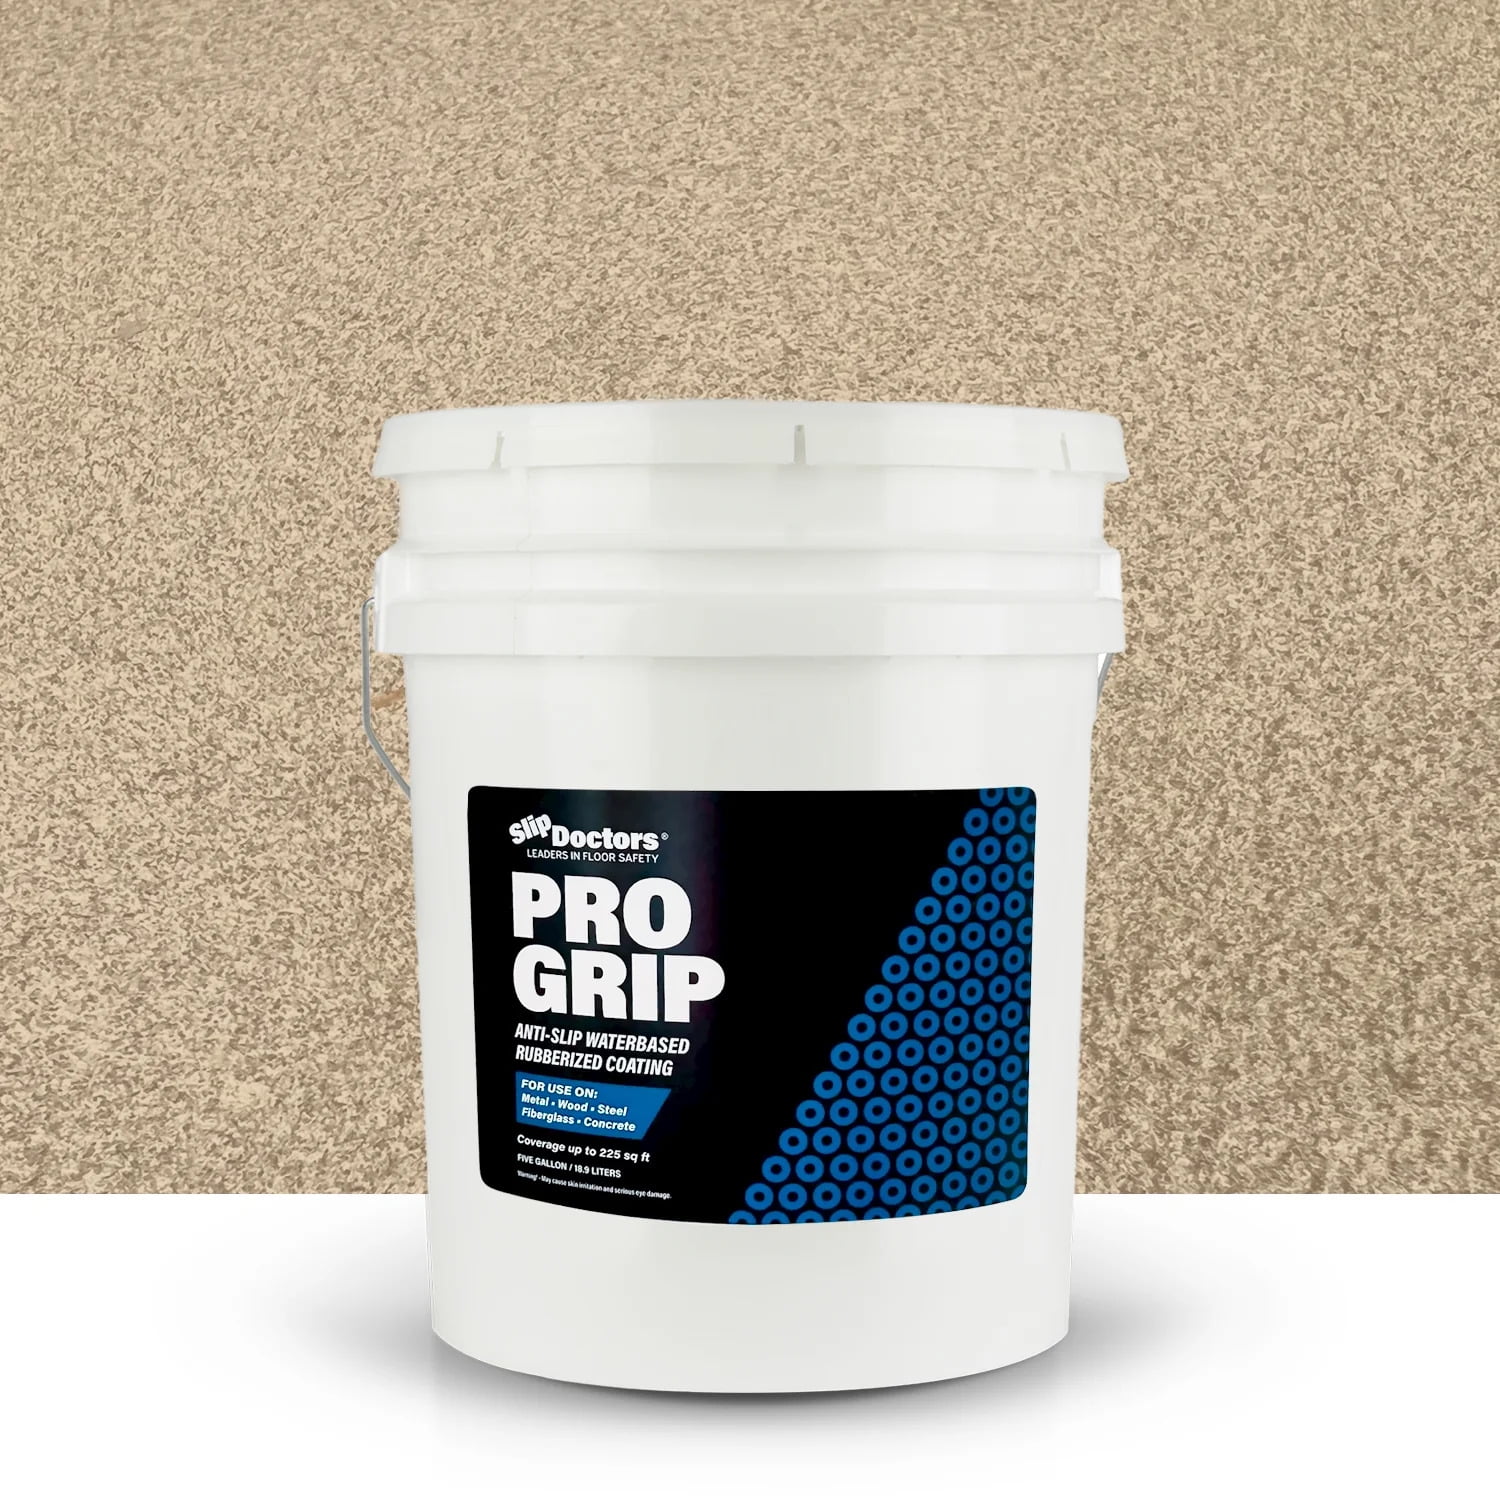 Pro Grip Rubberized Non-Skid Spray Coating for Decks, Floors, Boats &  Sports Courts – Non-Slip Rubber Paint for Concrete, Wood, Metal &  Fiberglass (5 Gallon, Base Gray), House Paint -  Canada